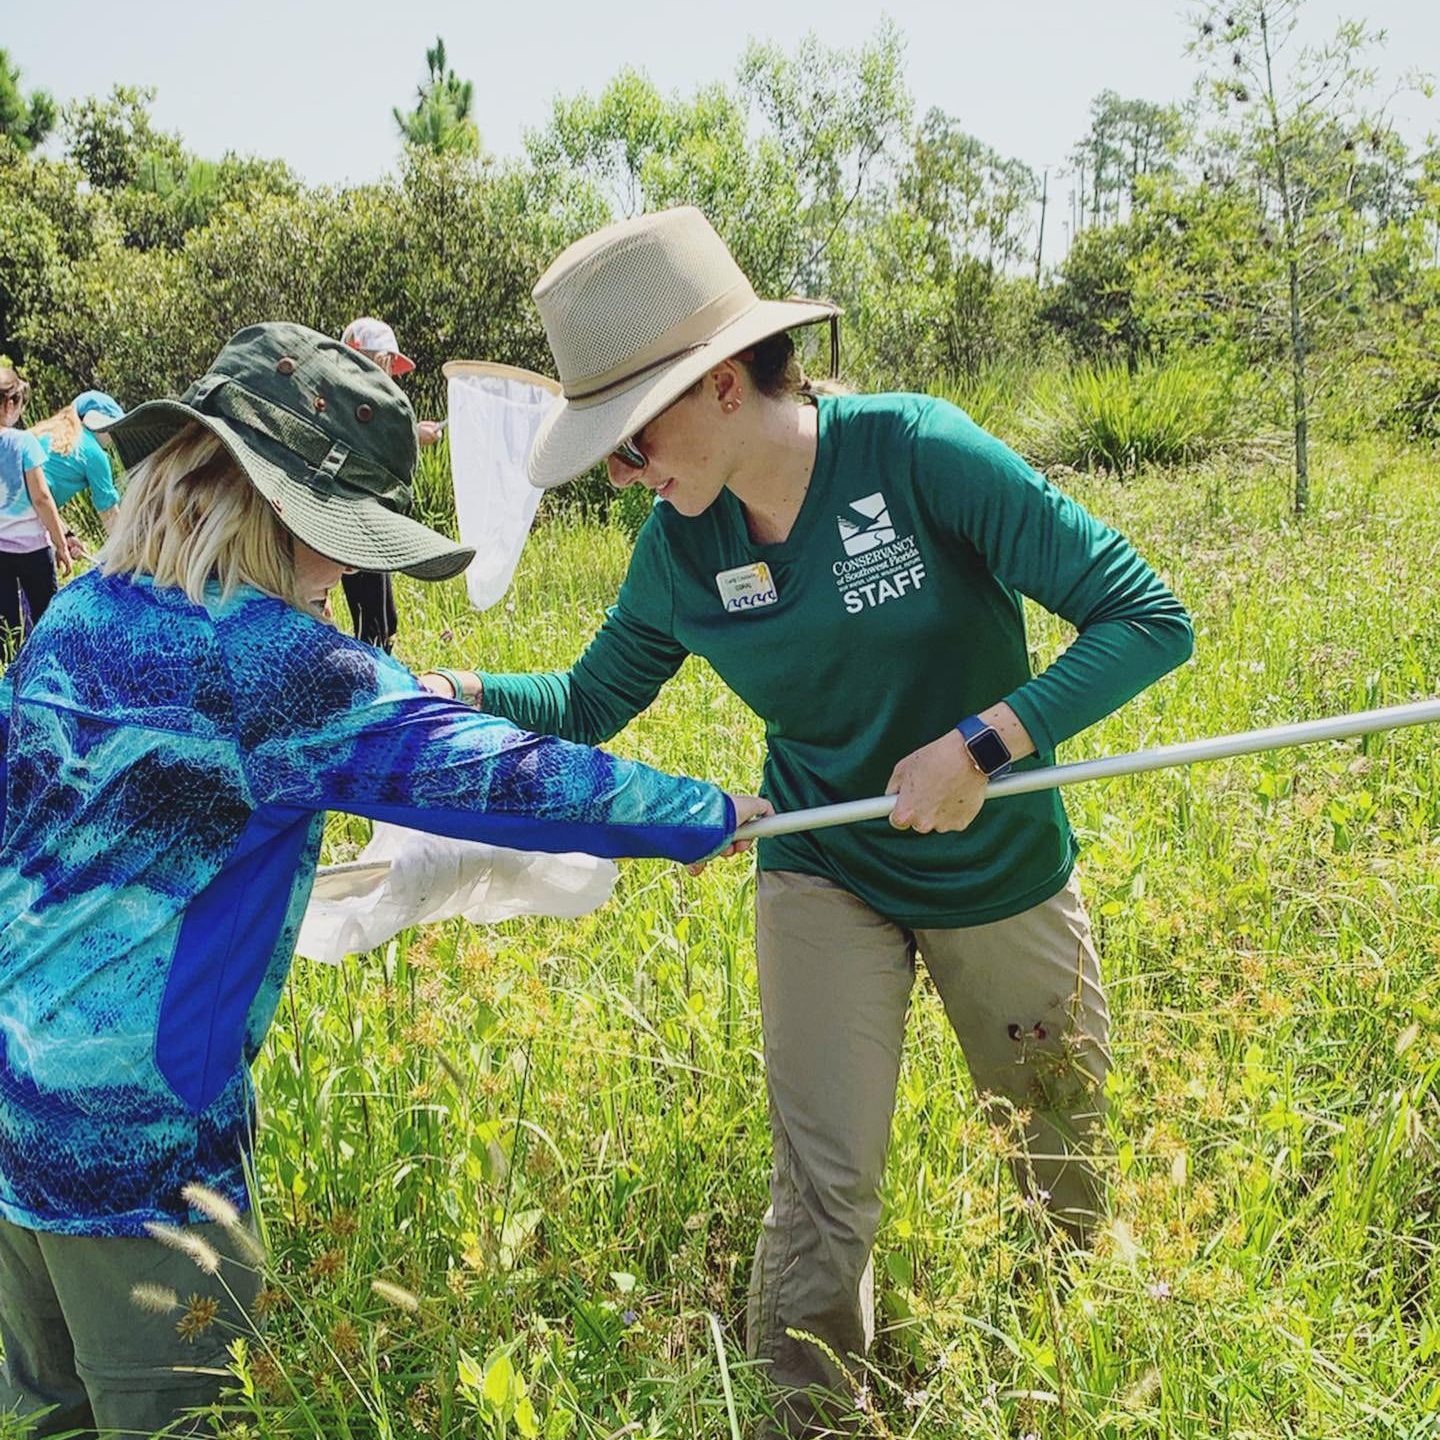 Conservancy of Southwest Florida education staff member checking a butterfly net with a student